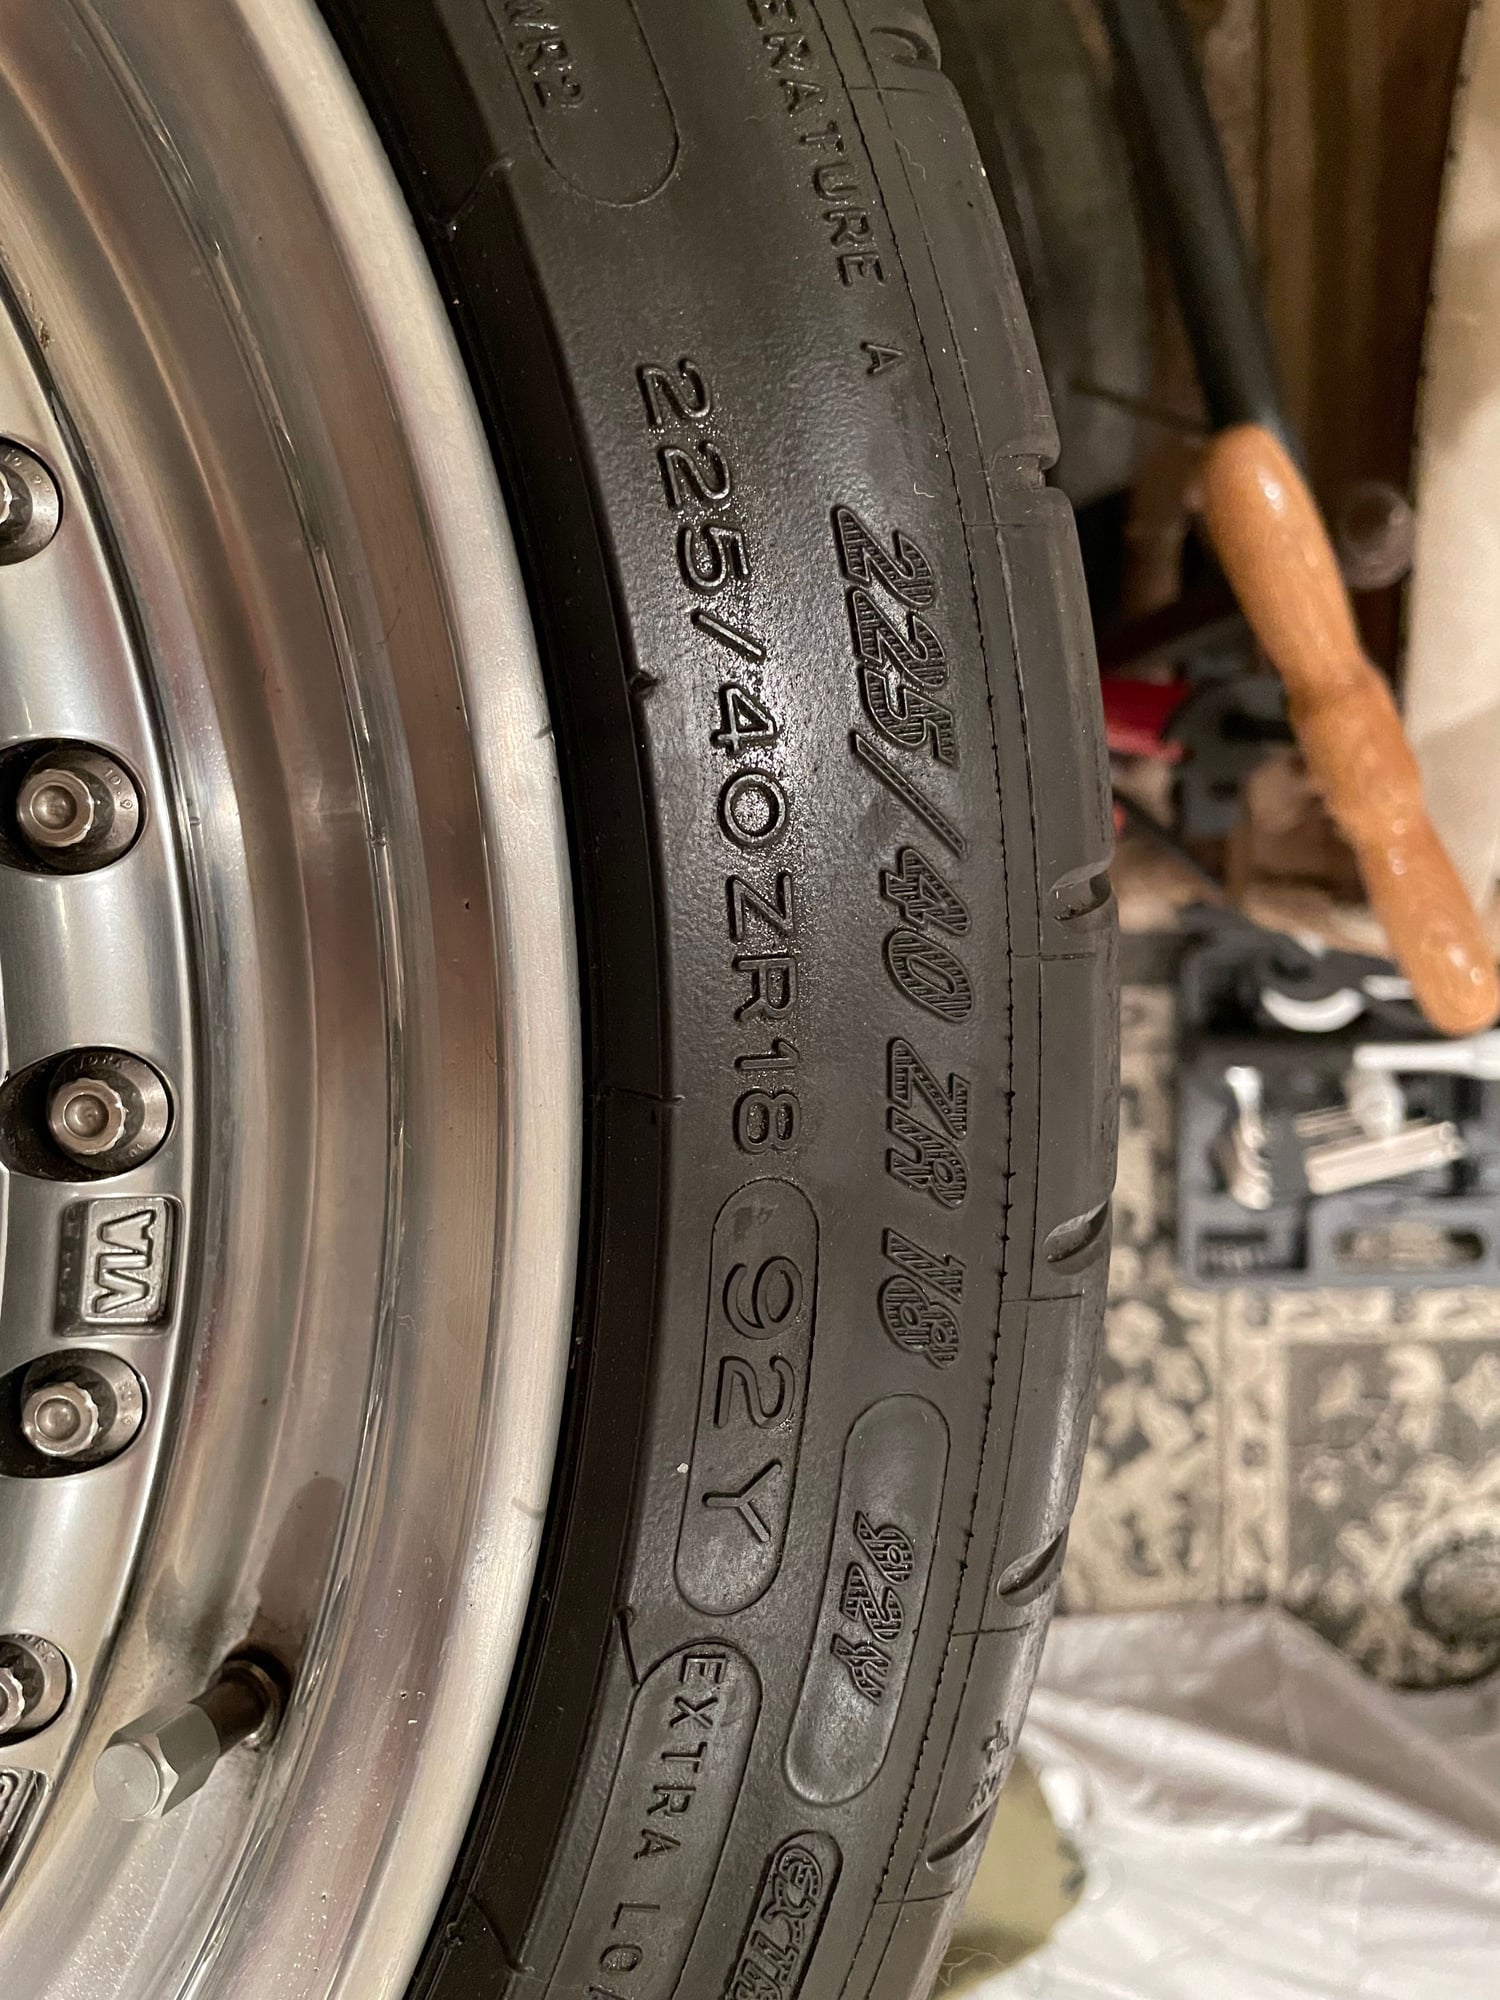 Accessories - 18" Work Brombacher Wheel/Tire set for sale - Used - 1989 to 1998 Porsche 911 - Calgary, AB T2T3A5, Canada